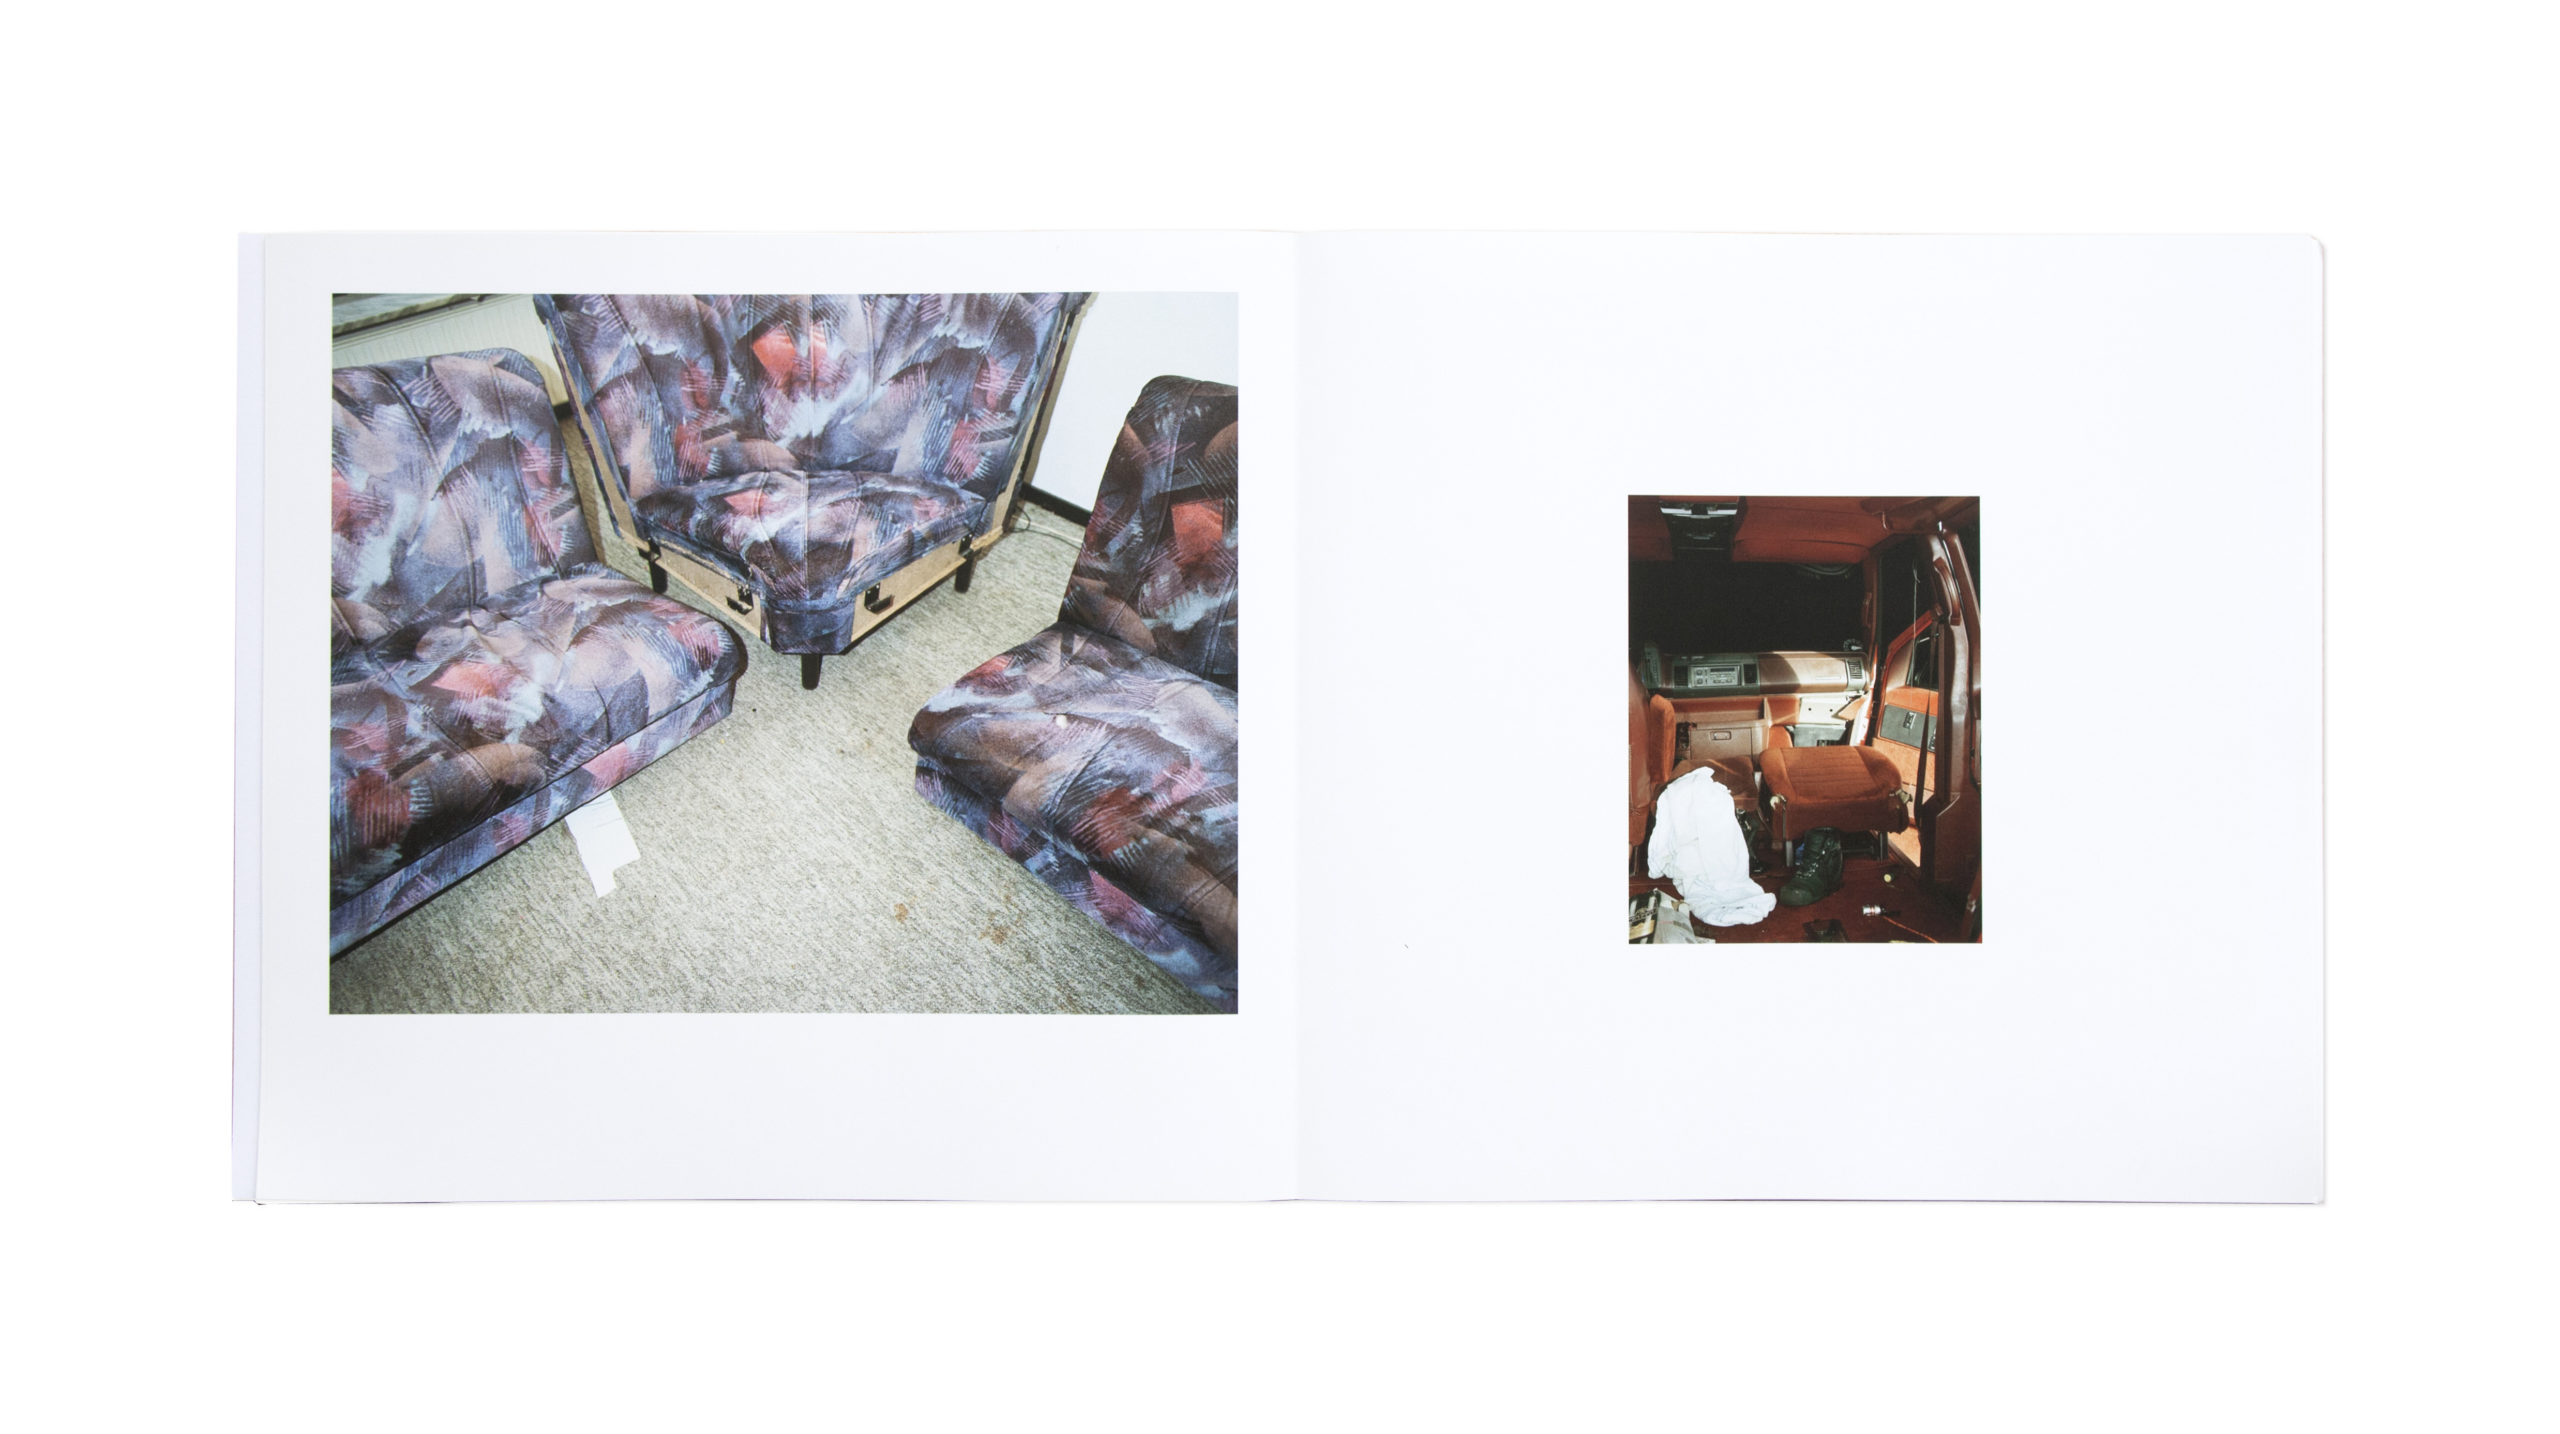 Images from the projects 3x1 and car crash studies in the book sammen stod by Nicolai Howalt